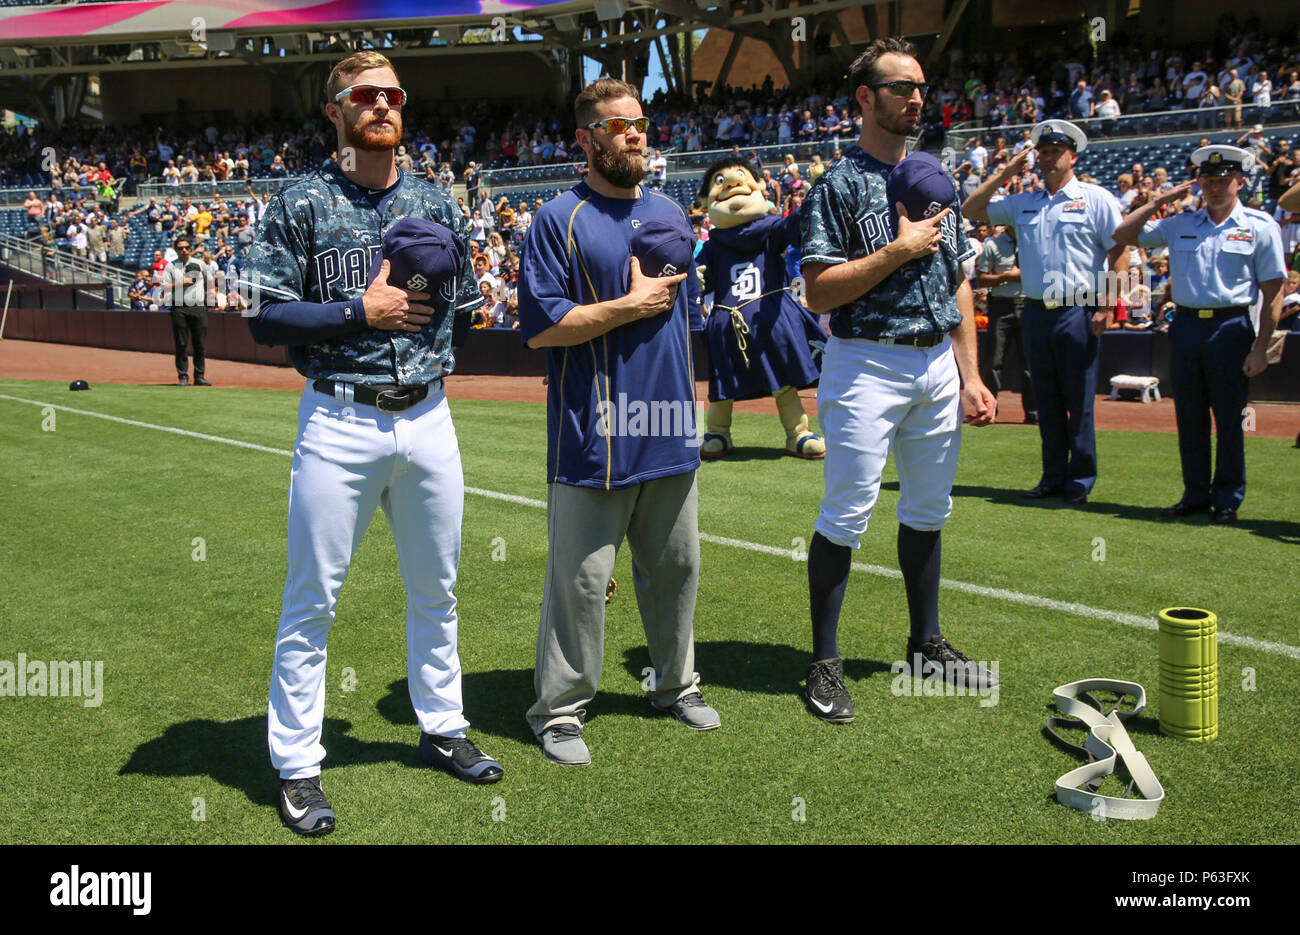 Members of the San Diego Padres wear City Connect uniforms before